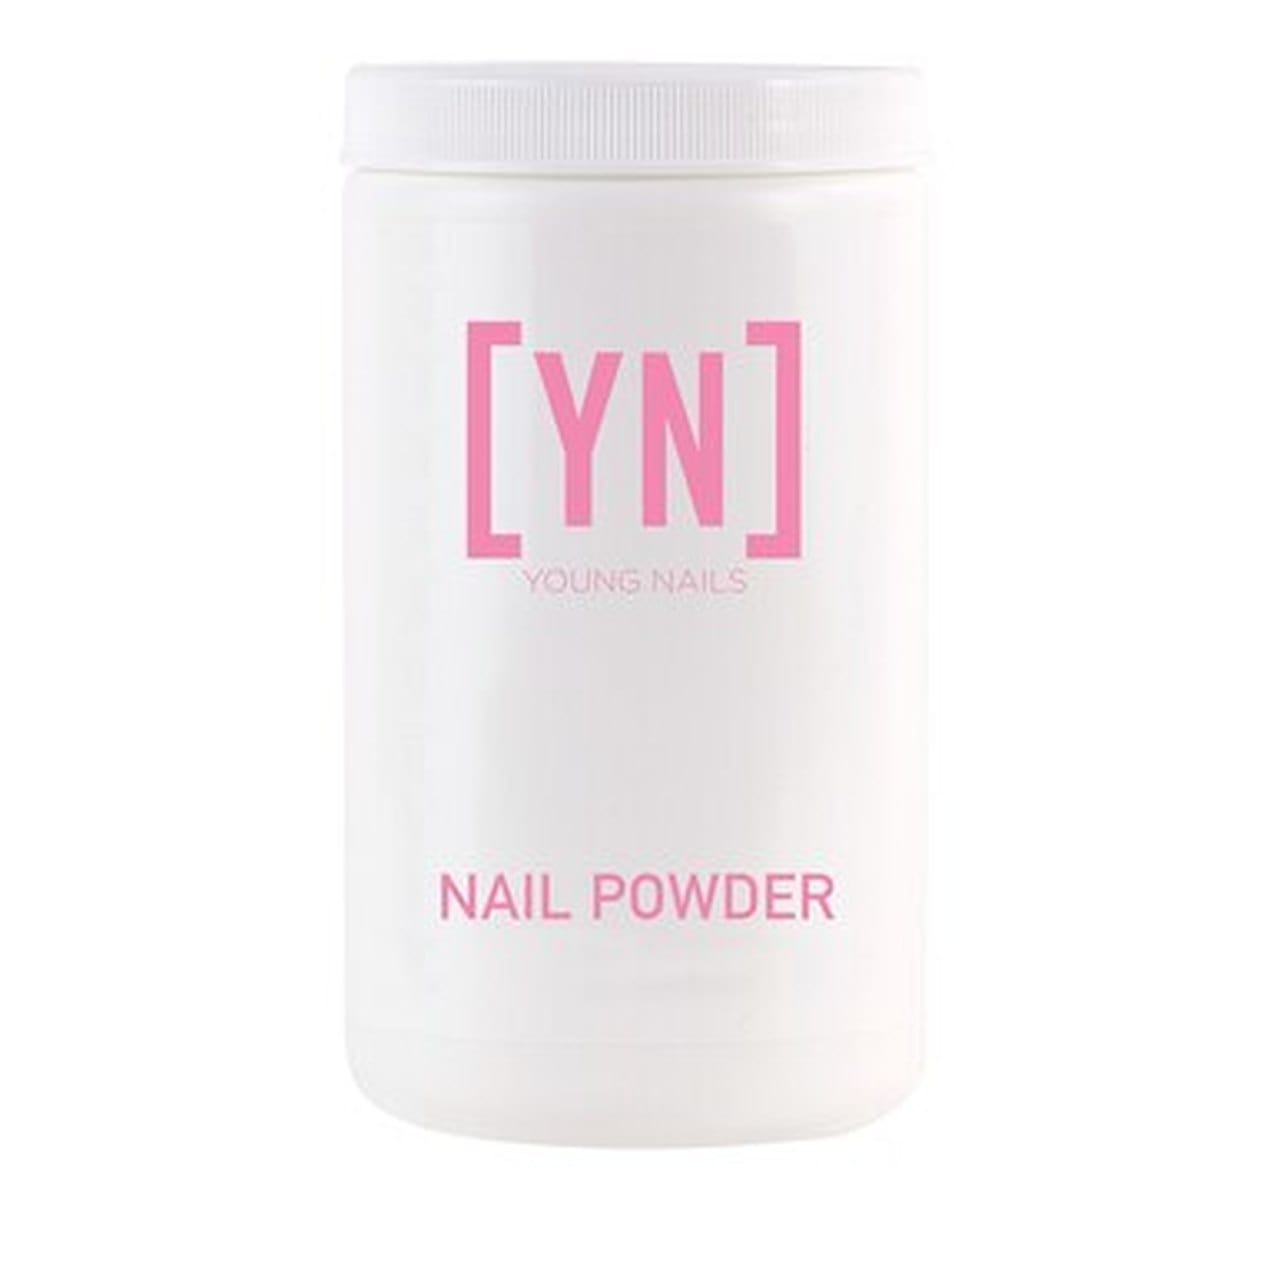 660g Speed White Powder Nails - Young Nails - Luxe Pacifique